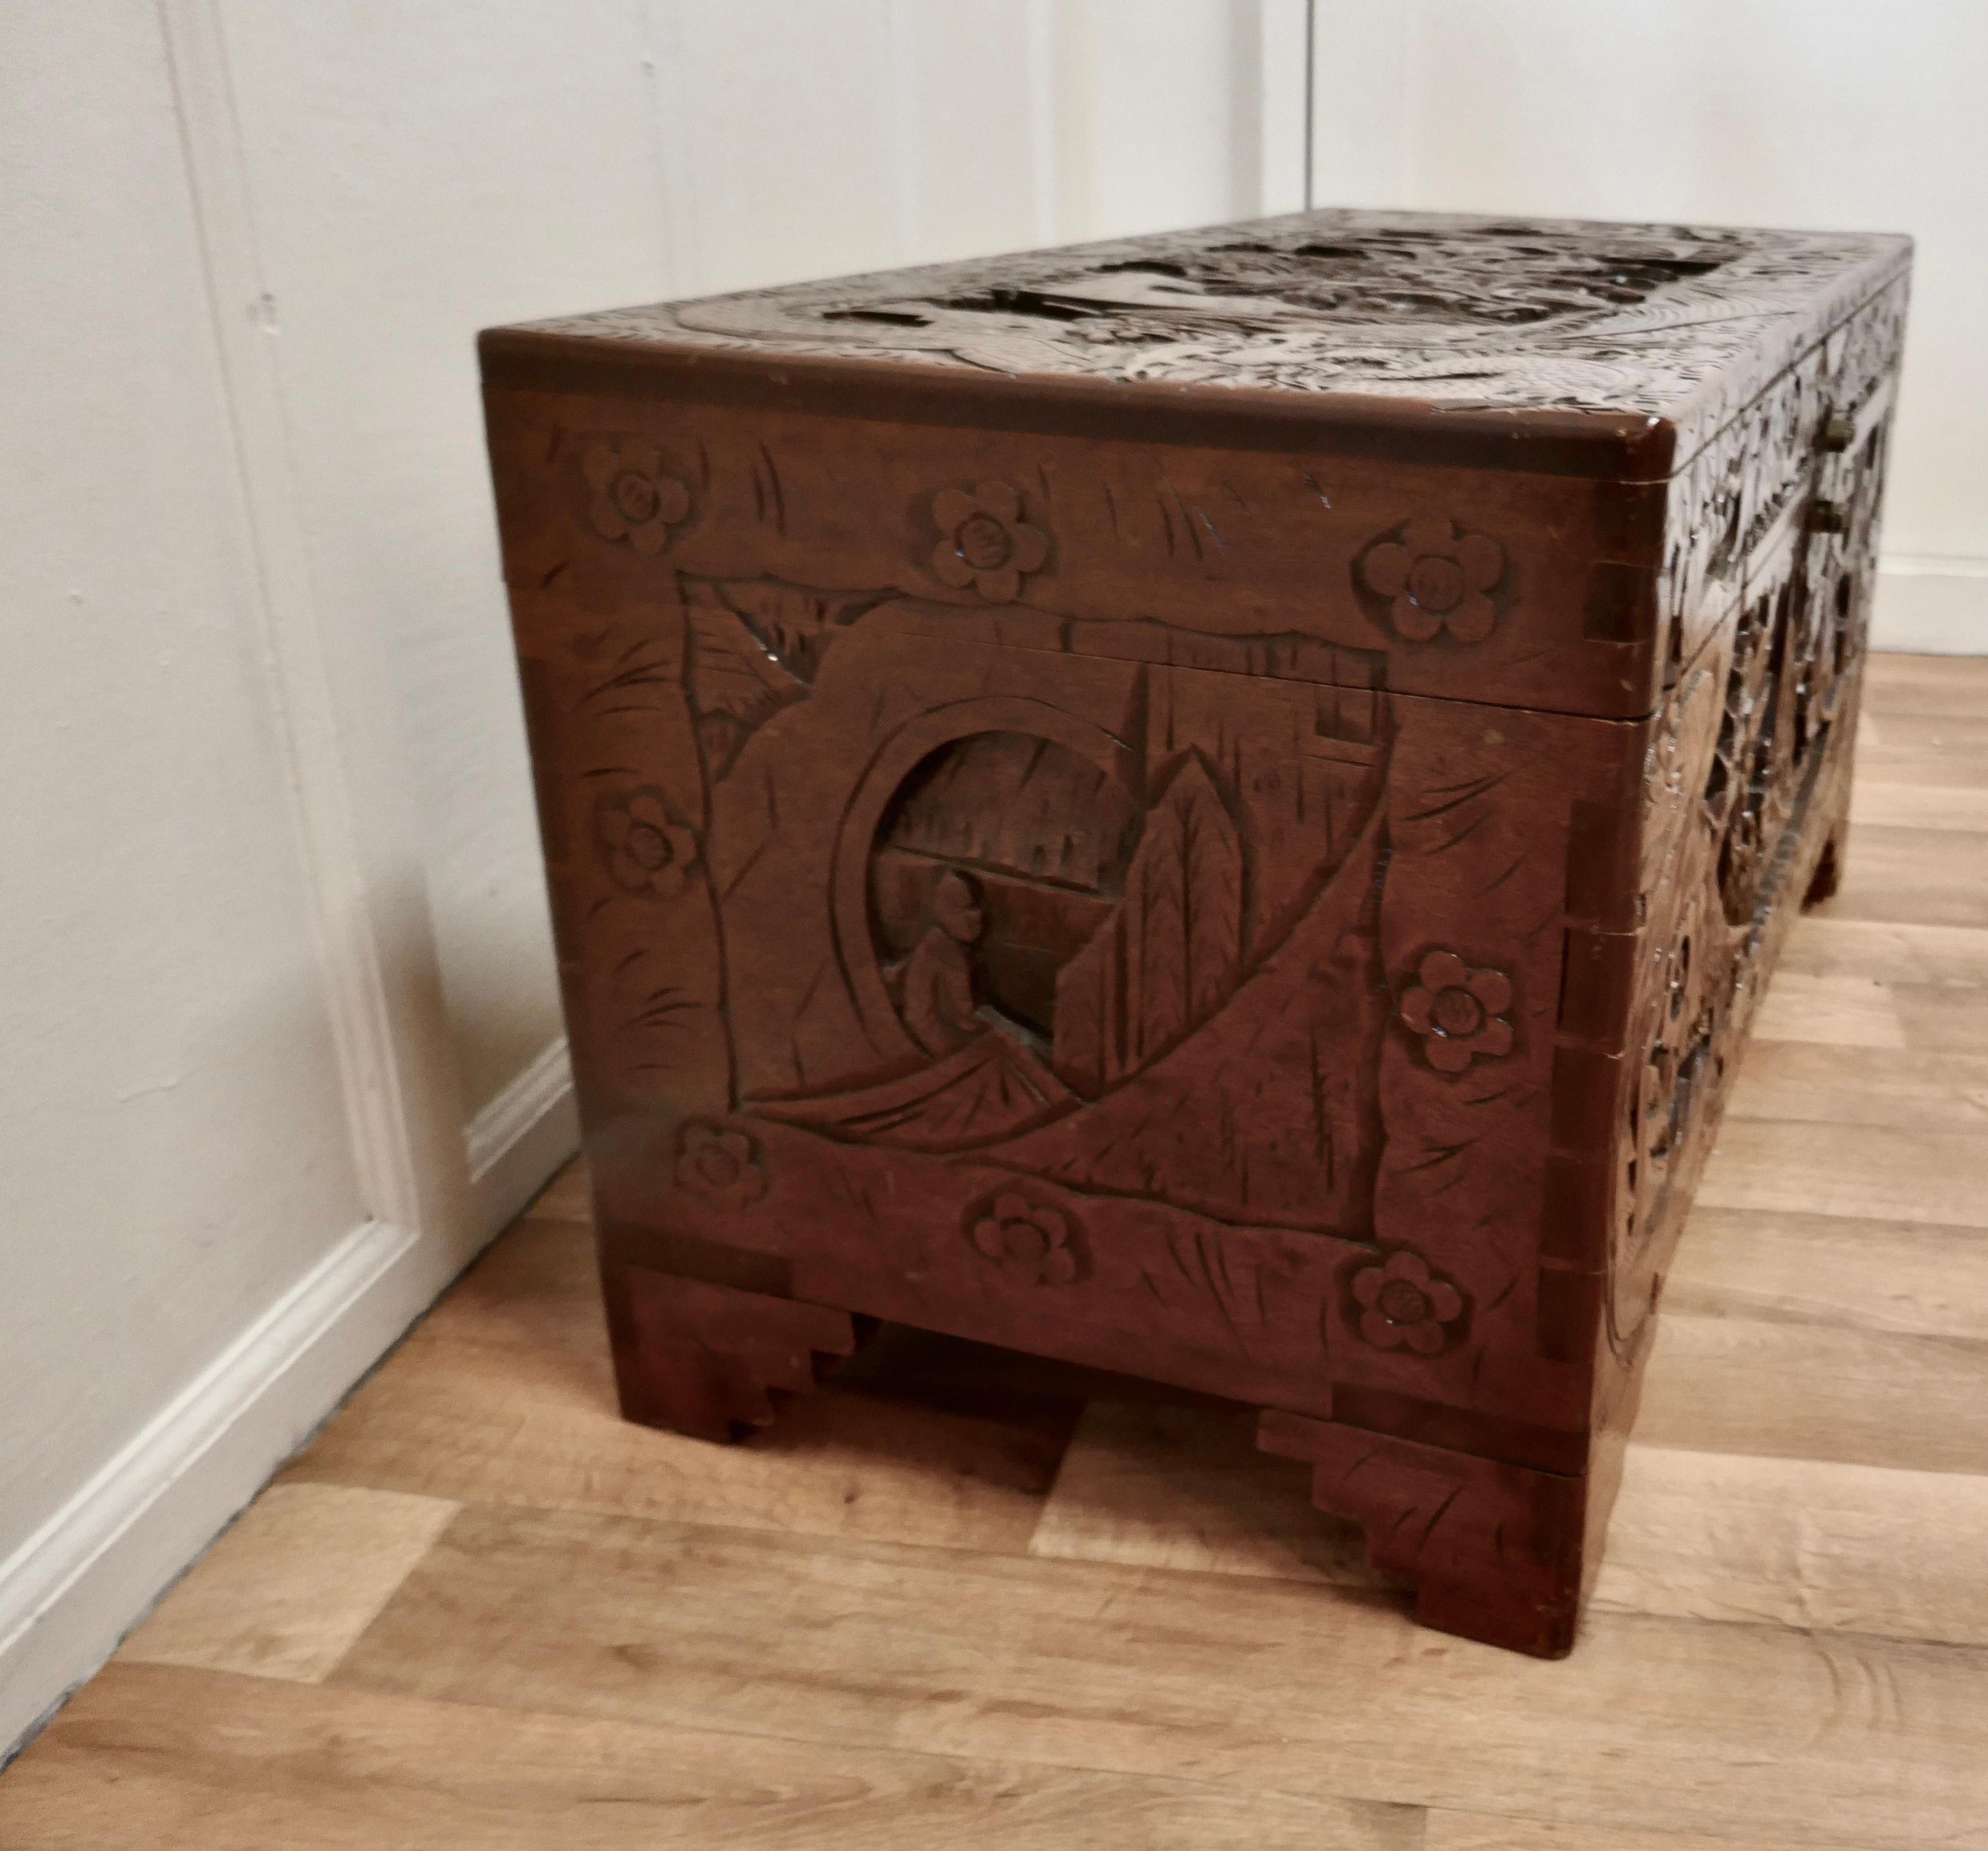 Large carved Oriental Camphor wood chest

This carved chest is made from Camphor Wood, for those of you who do not know camphor wood it is similar to Mahogany it is a hard wood which lends itself very well to carving.
However the main reason for